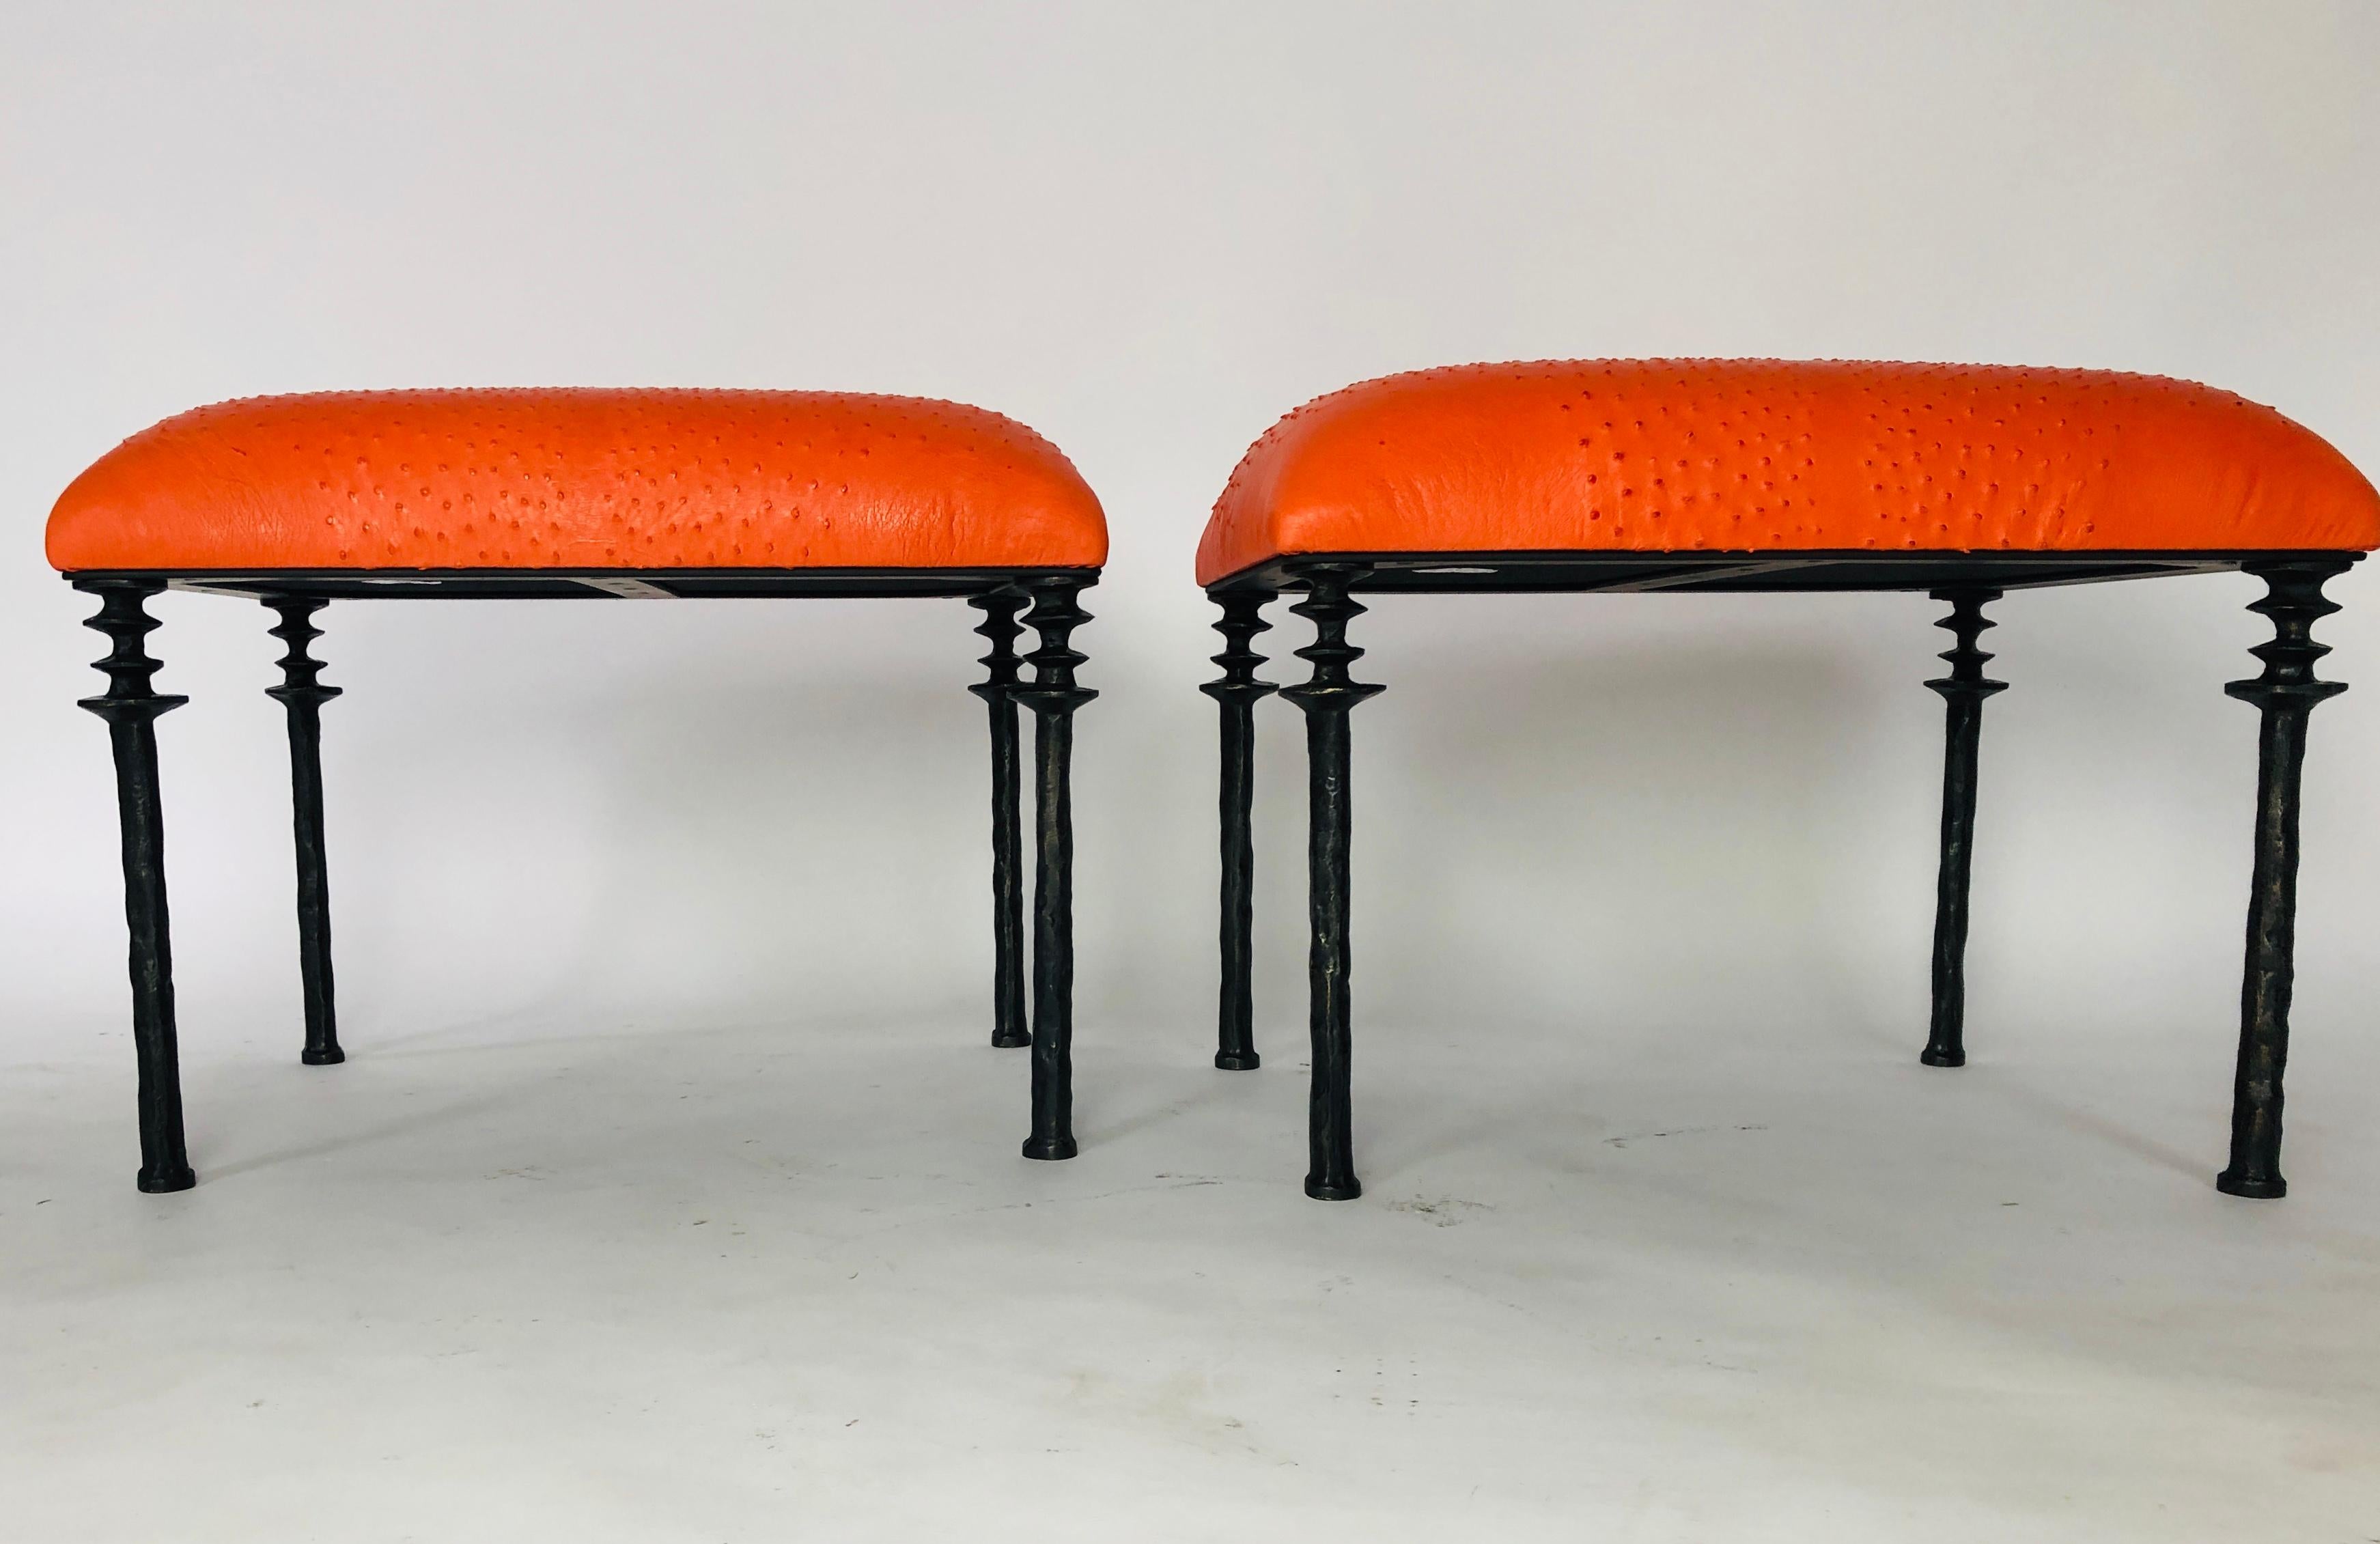 American Pair of Sorgue Stools, by Bourgeois Boheme Atelier, Tangerine Ostrich Leather